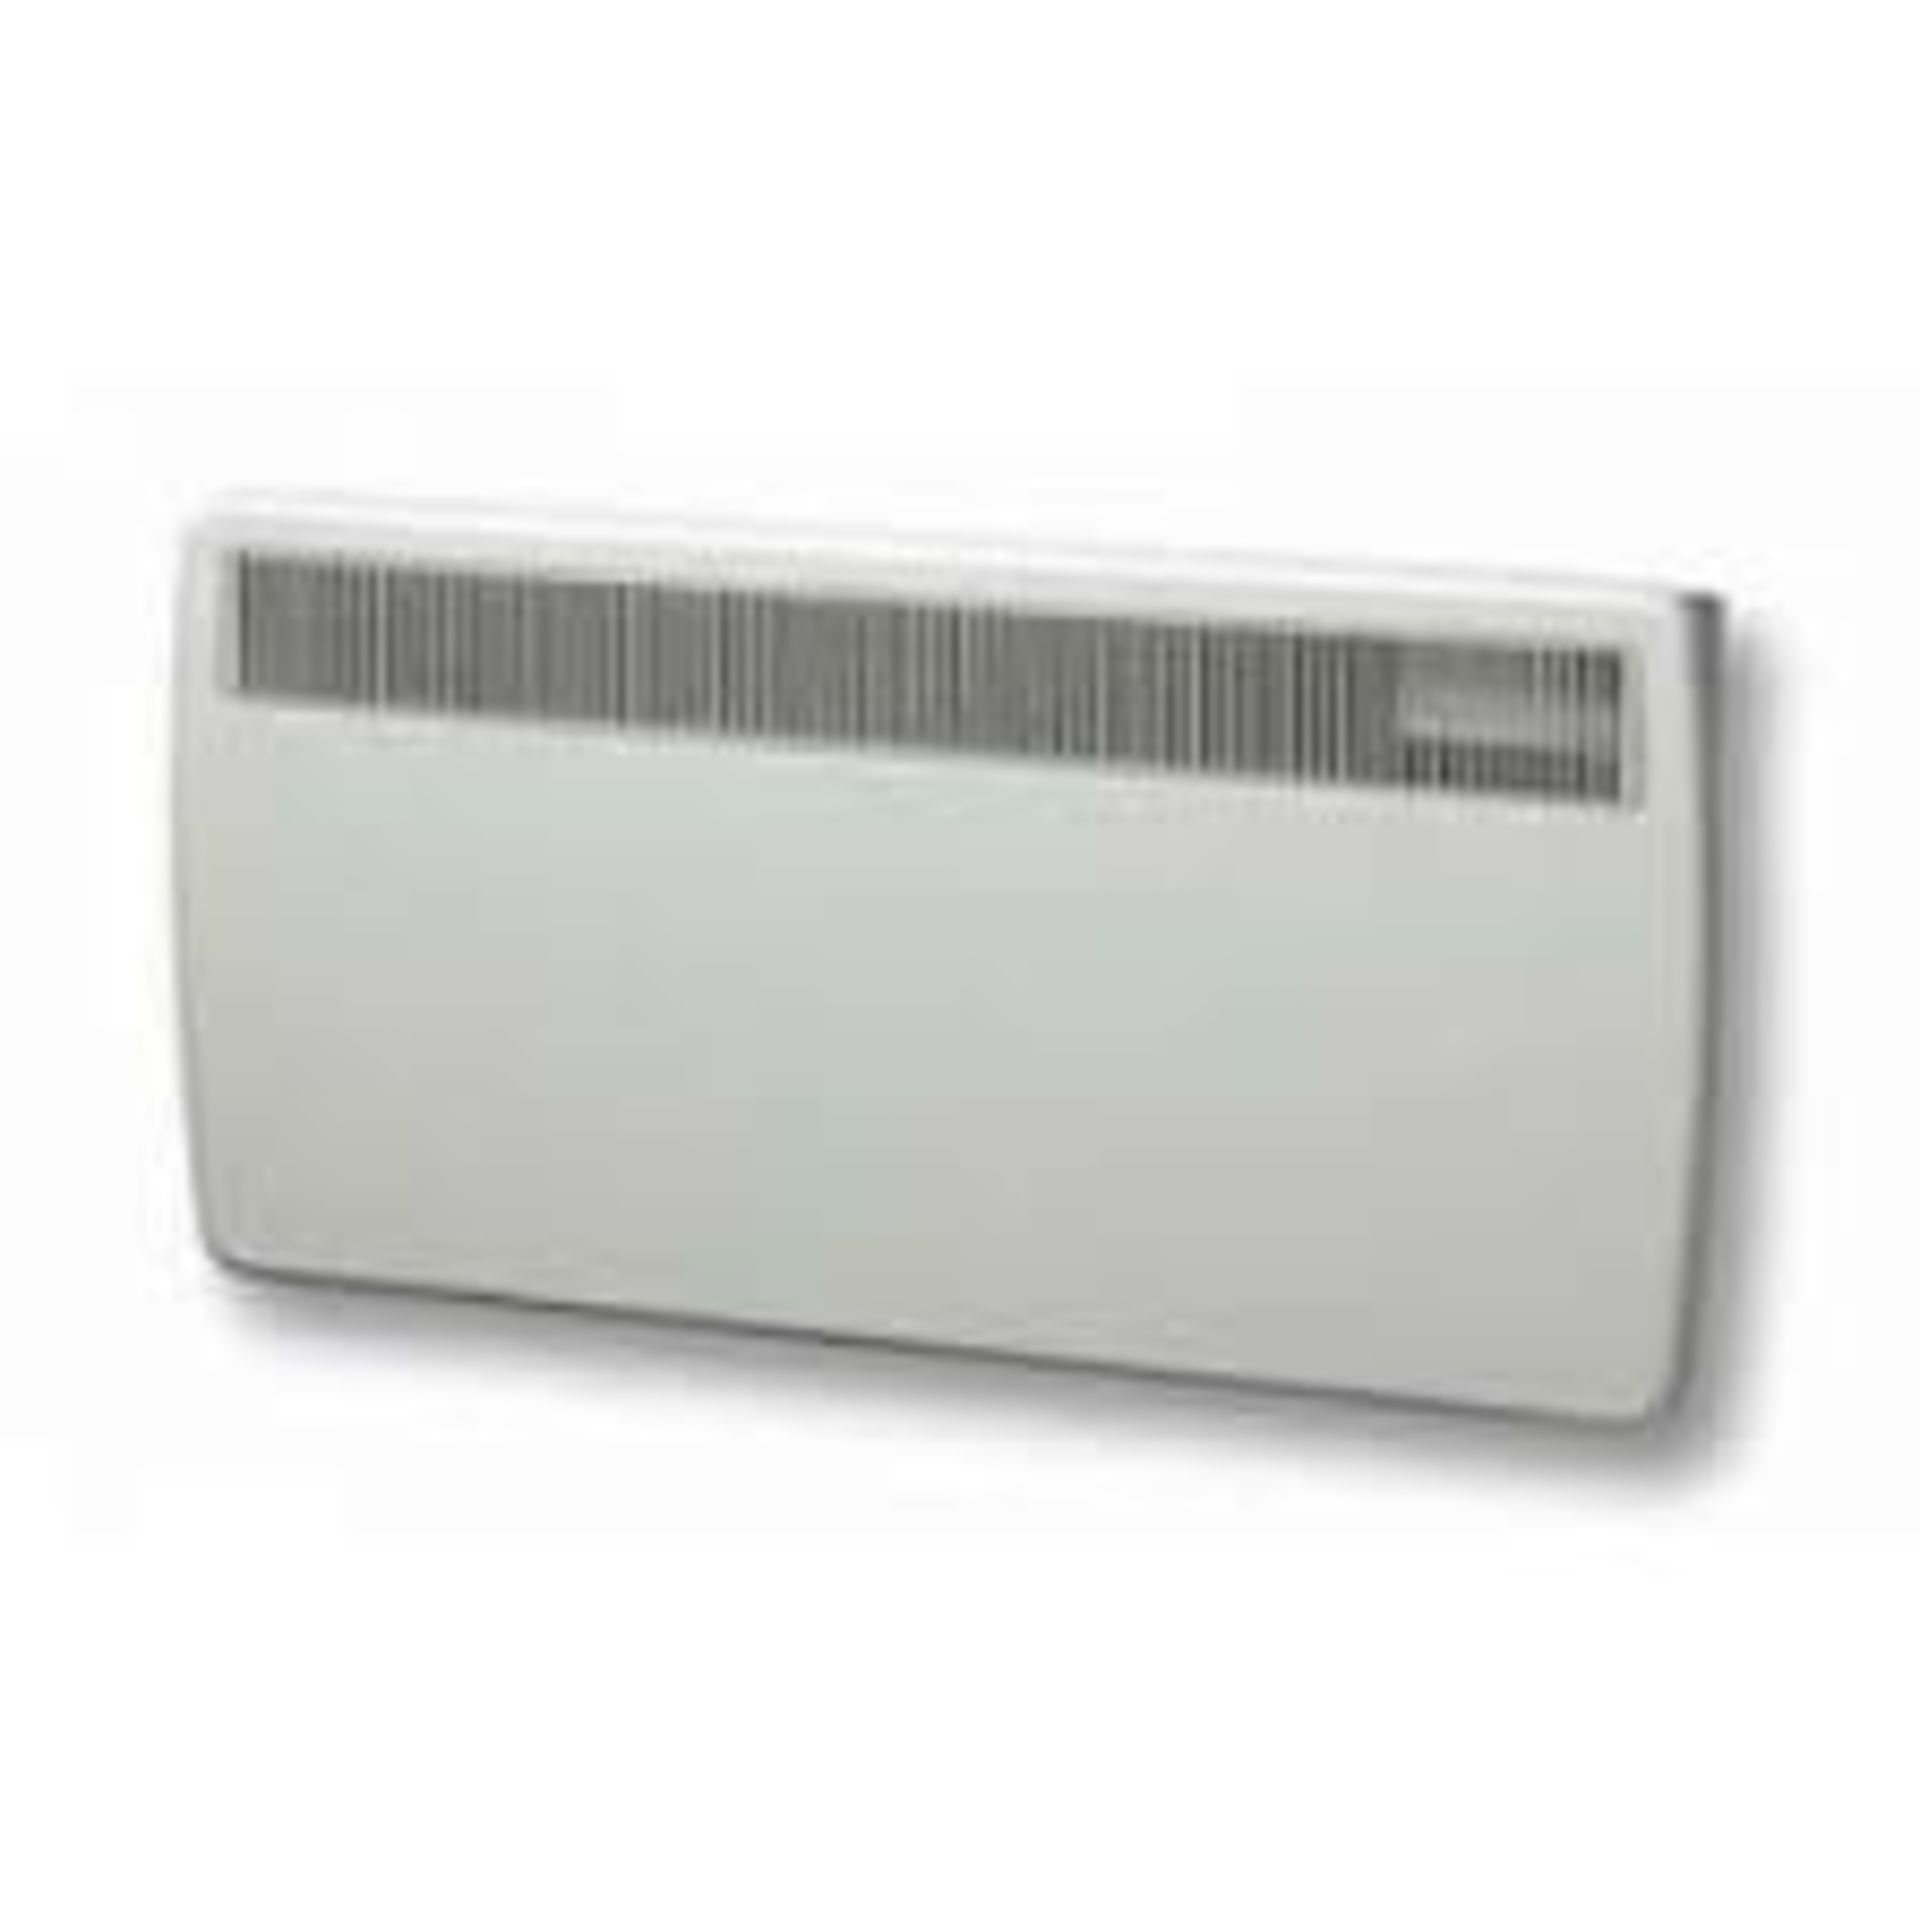 2 X NEW BOXED Heatstore 1.5kW Timer Panel Heater. (HSP1500TSX). ROW 15. RRP £349 EACH